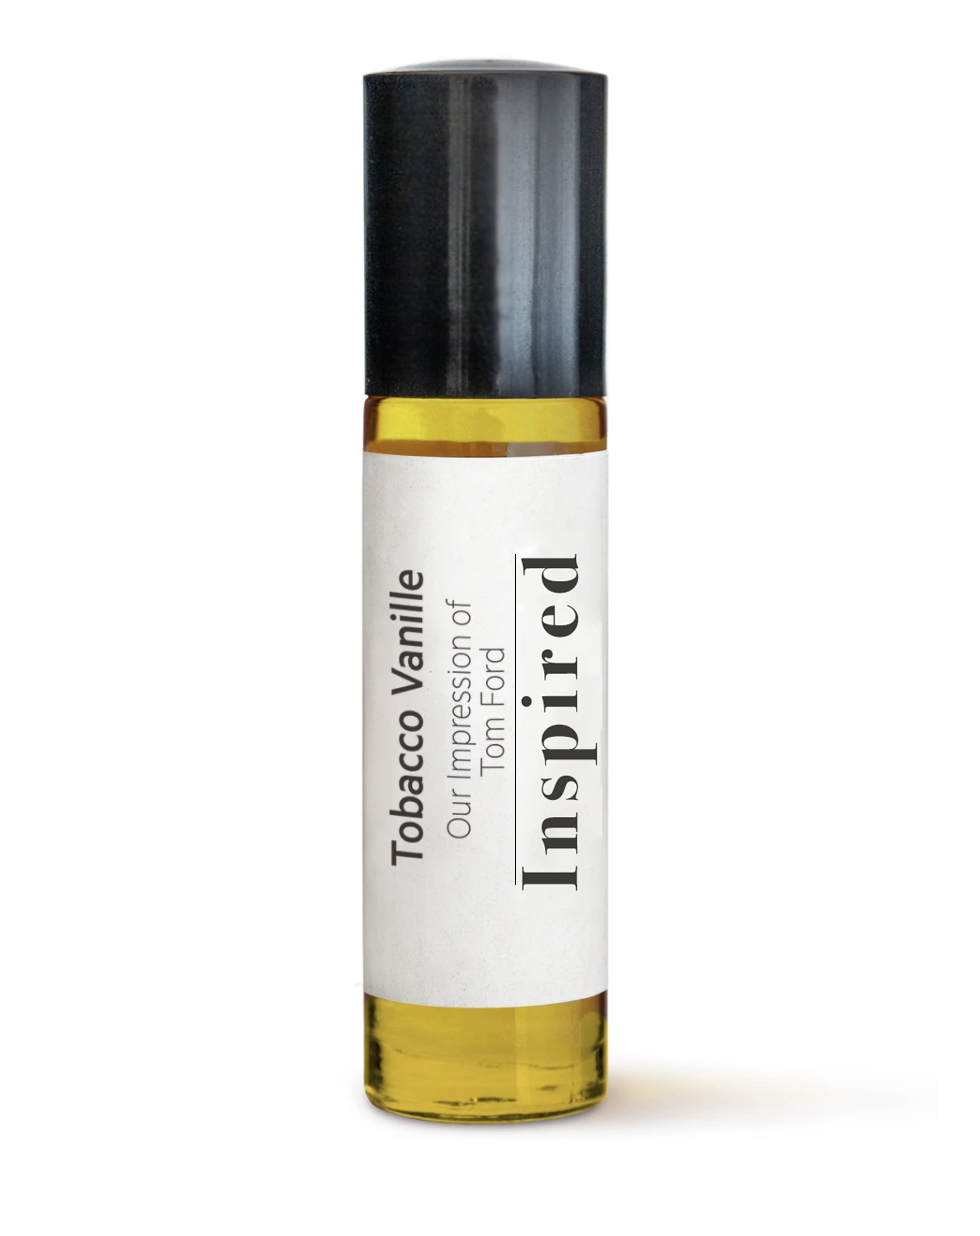 Luxury Long Lasting Perfume Oil Inspired By Tom Ford - Tobacco Vanille Vegan Friendly And Cruelty Free